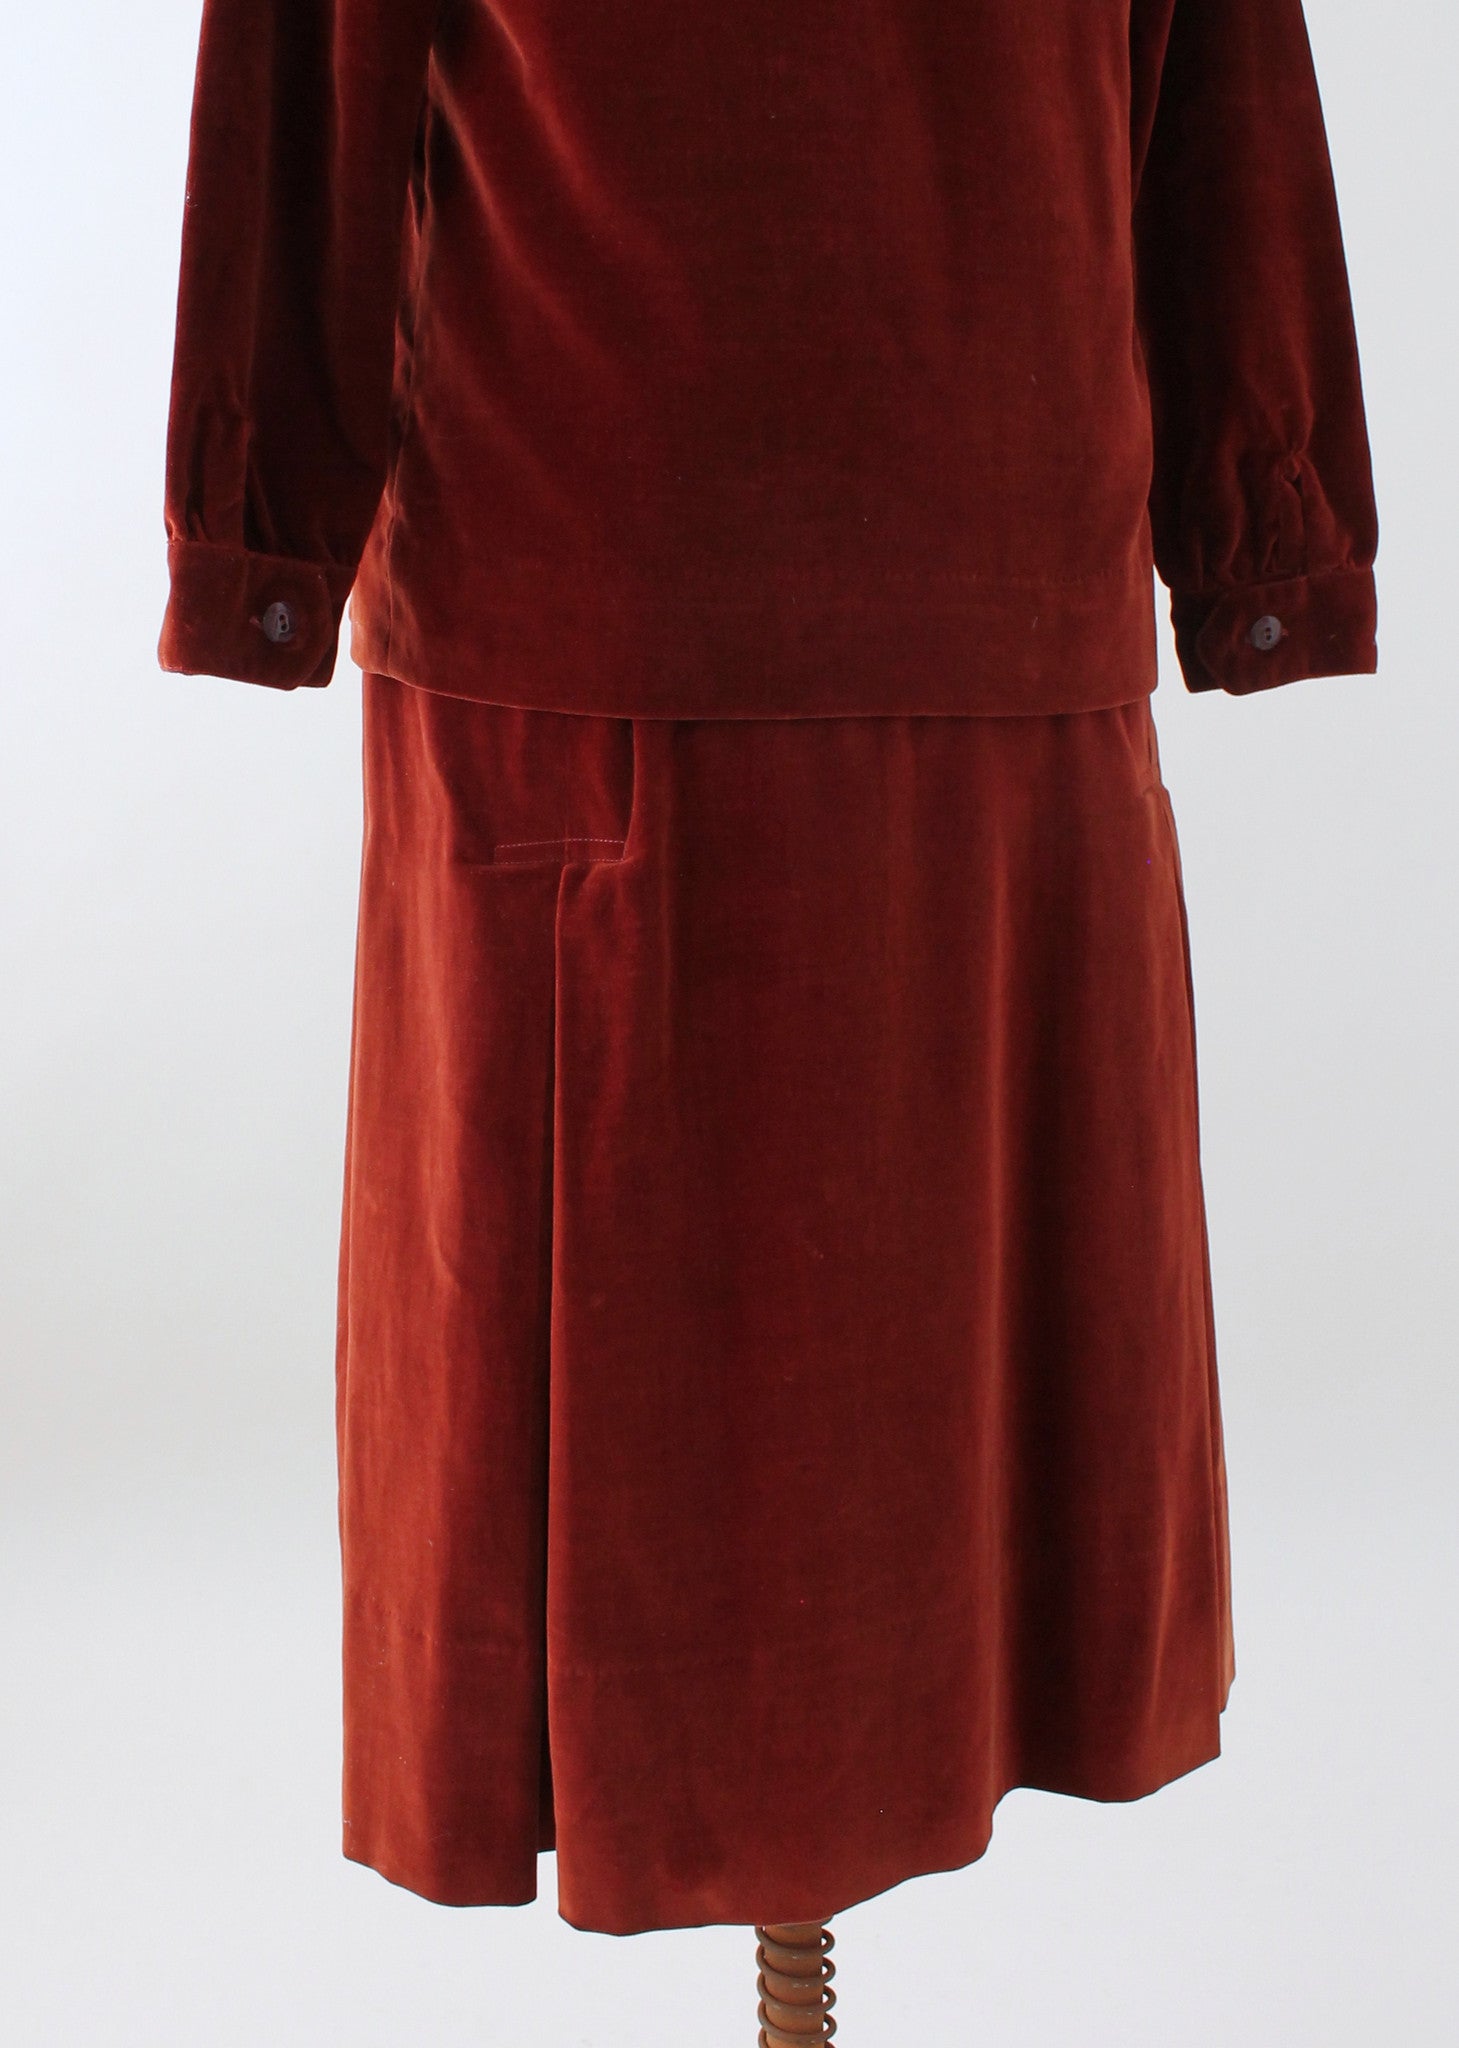 Vintage 1920s Chic Two Piece Velvet Day Dress - Raleigh Vintage